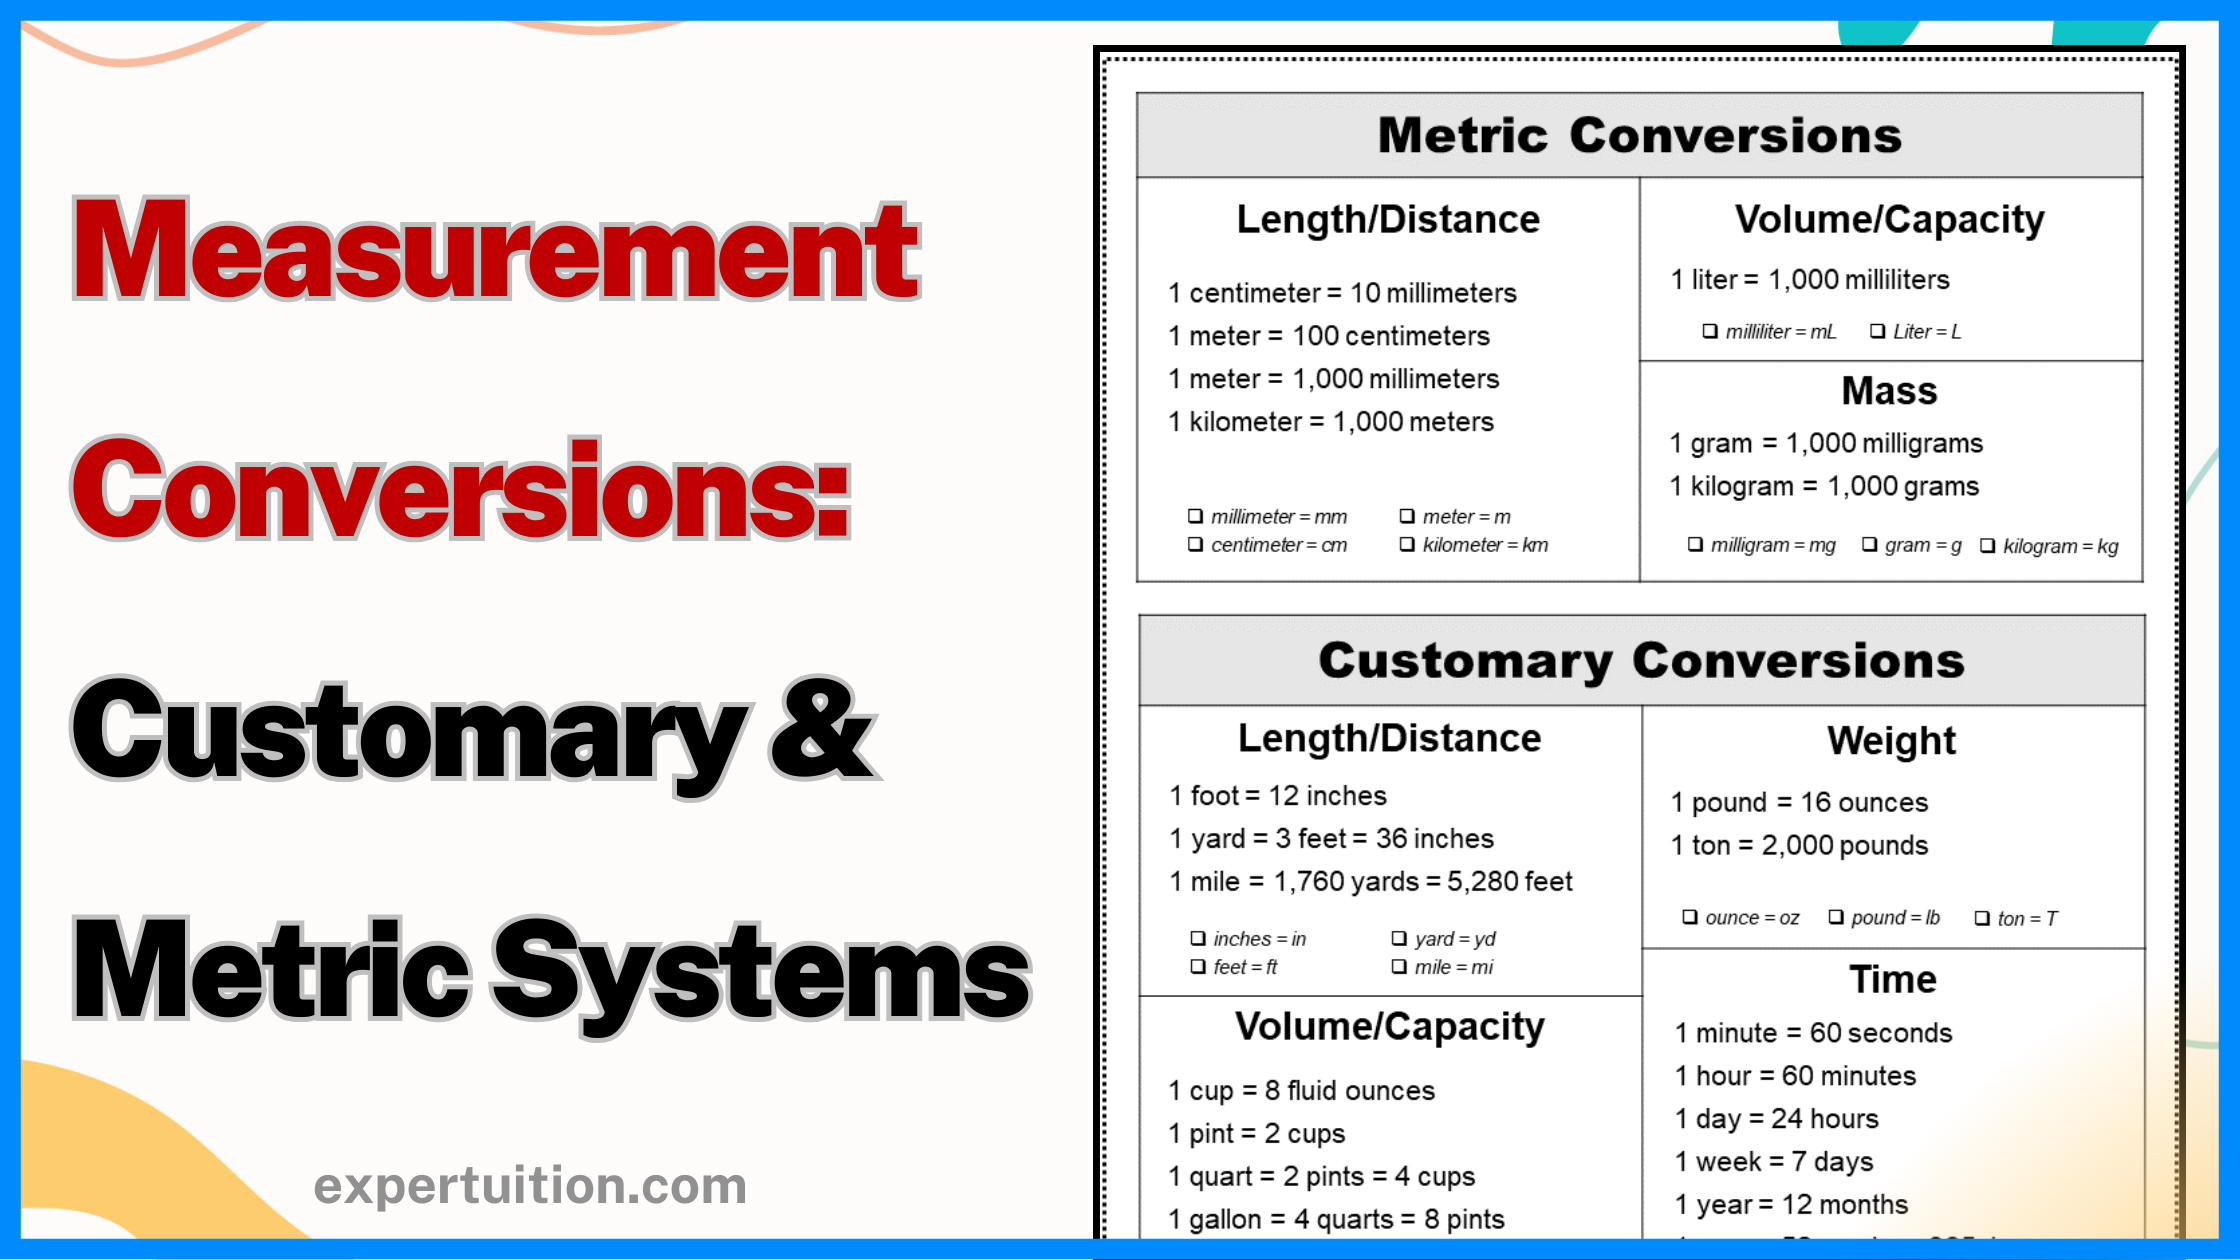 Measurement Systems and Conversions Customary and Metric Units of Measurements